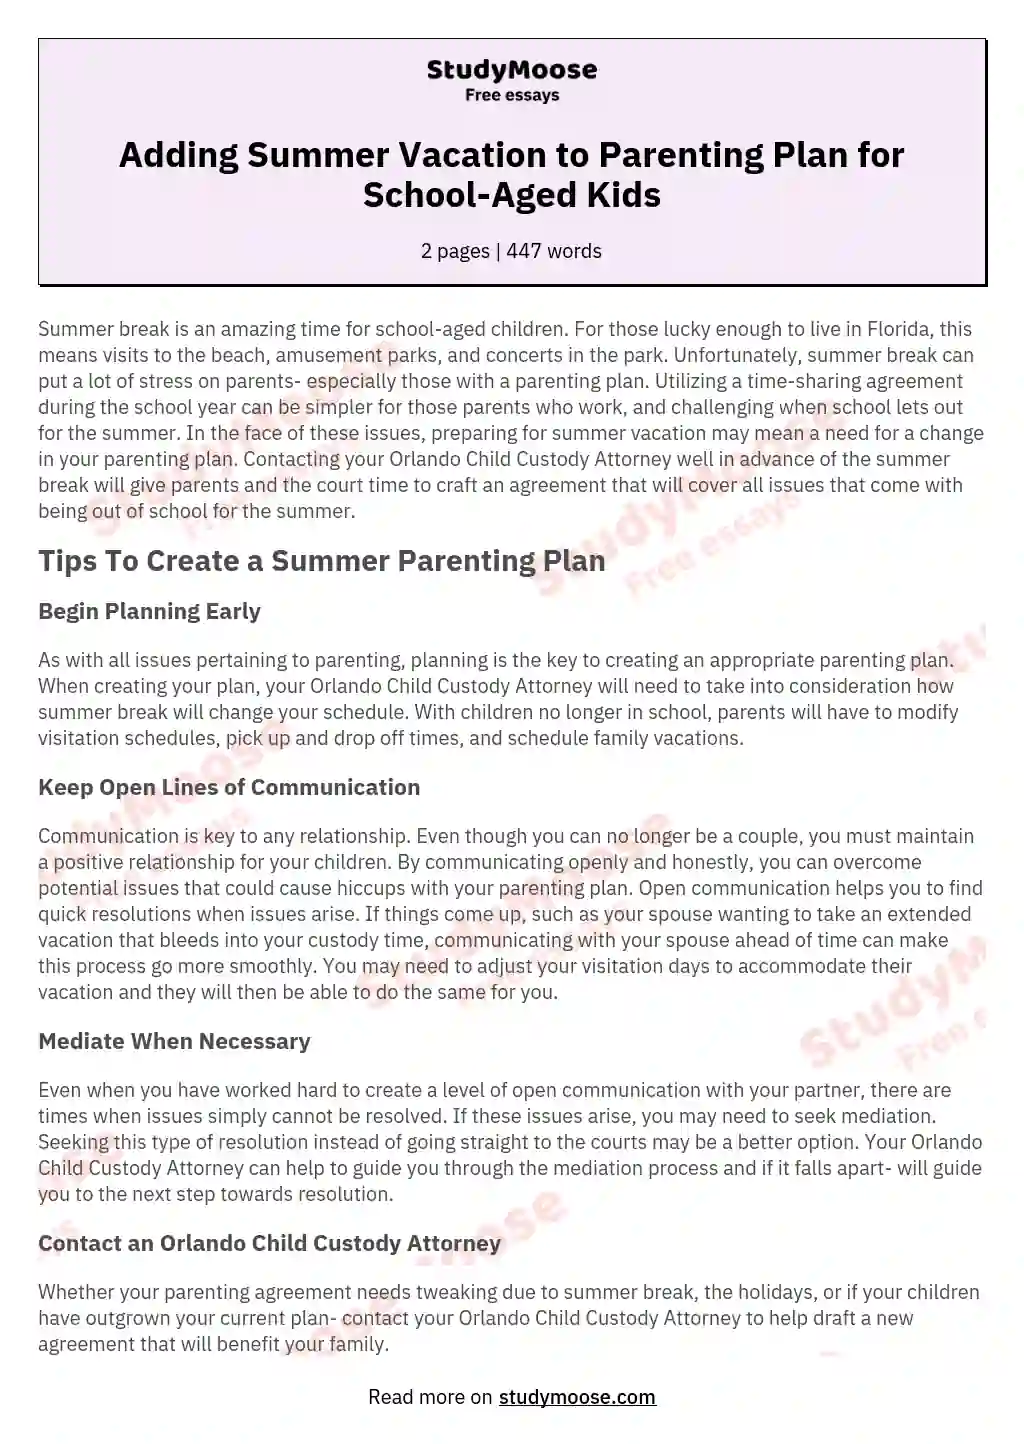 Adding Summer Vacation to Parenting Plan for School-Aged Kids